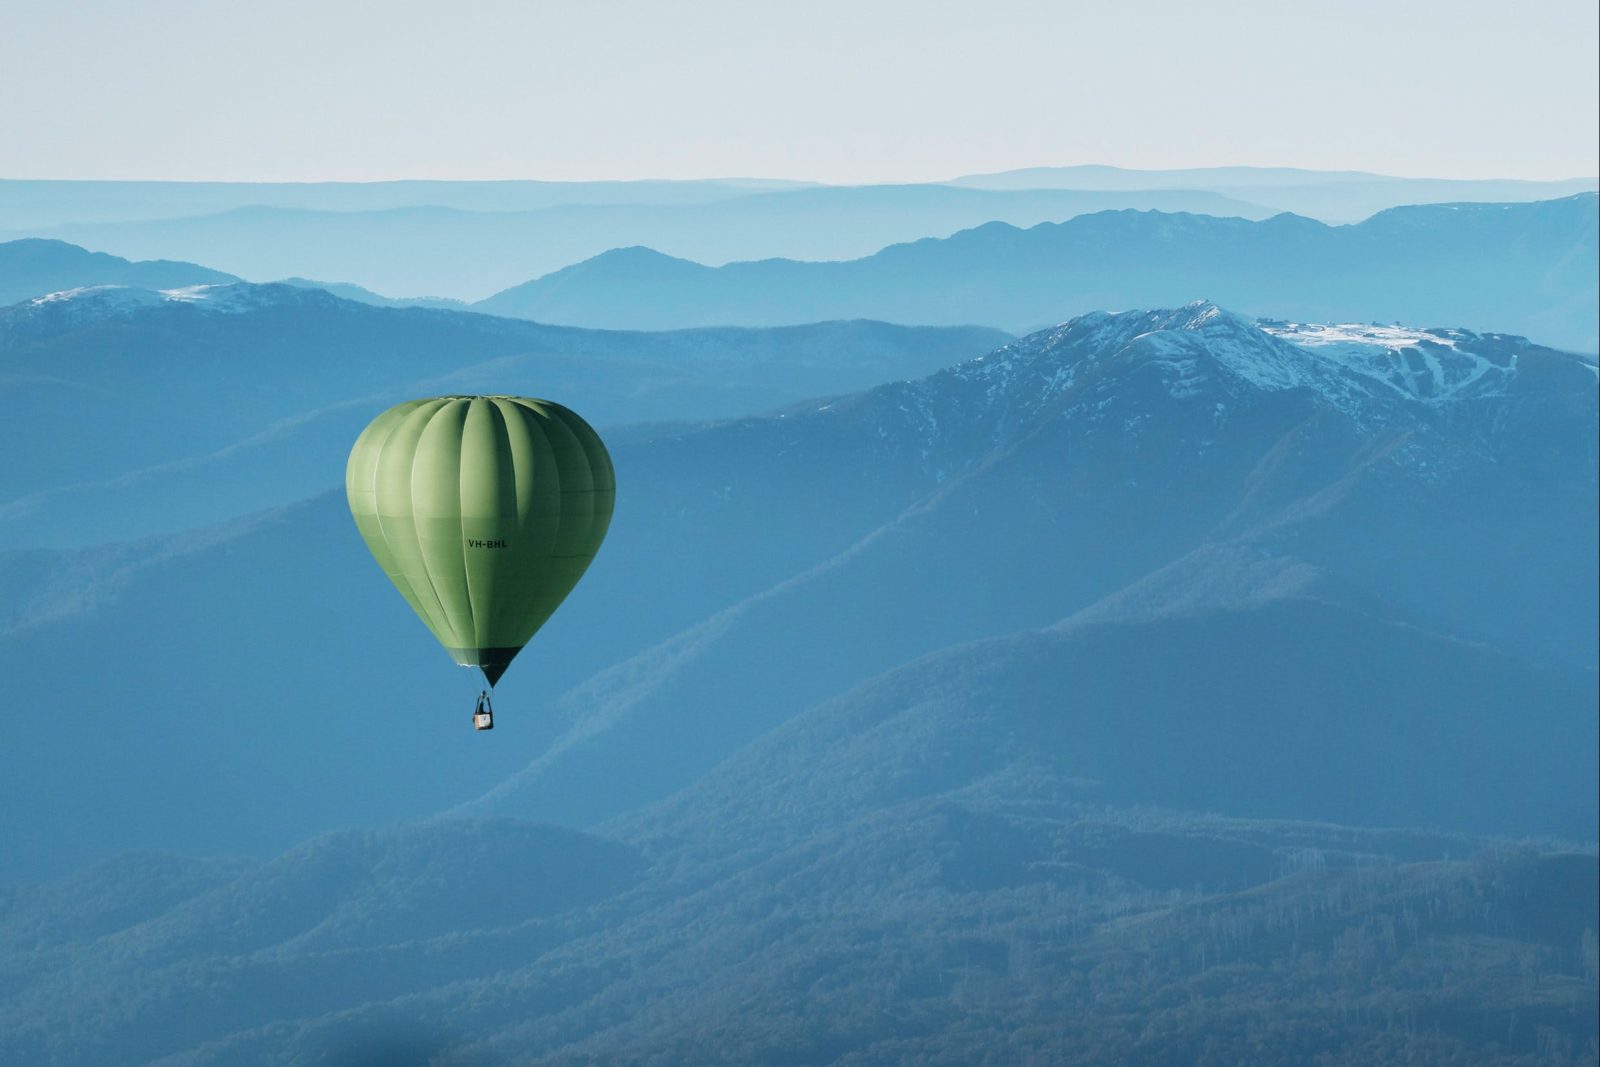 Green Hot Air Balloon Over Mansfield - Mt Buller in the Background